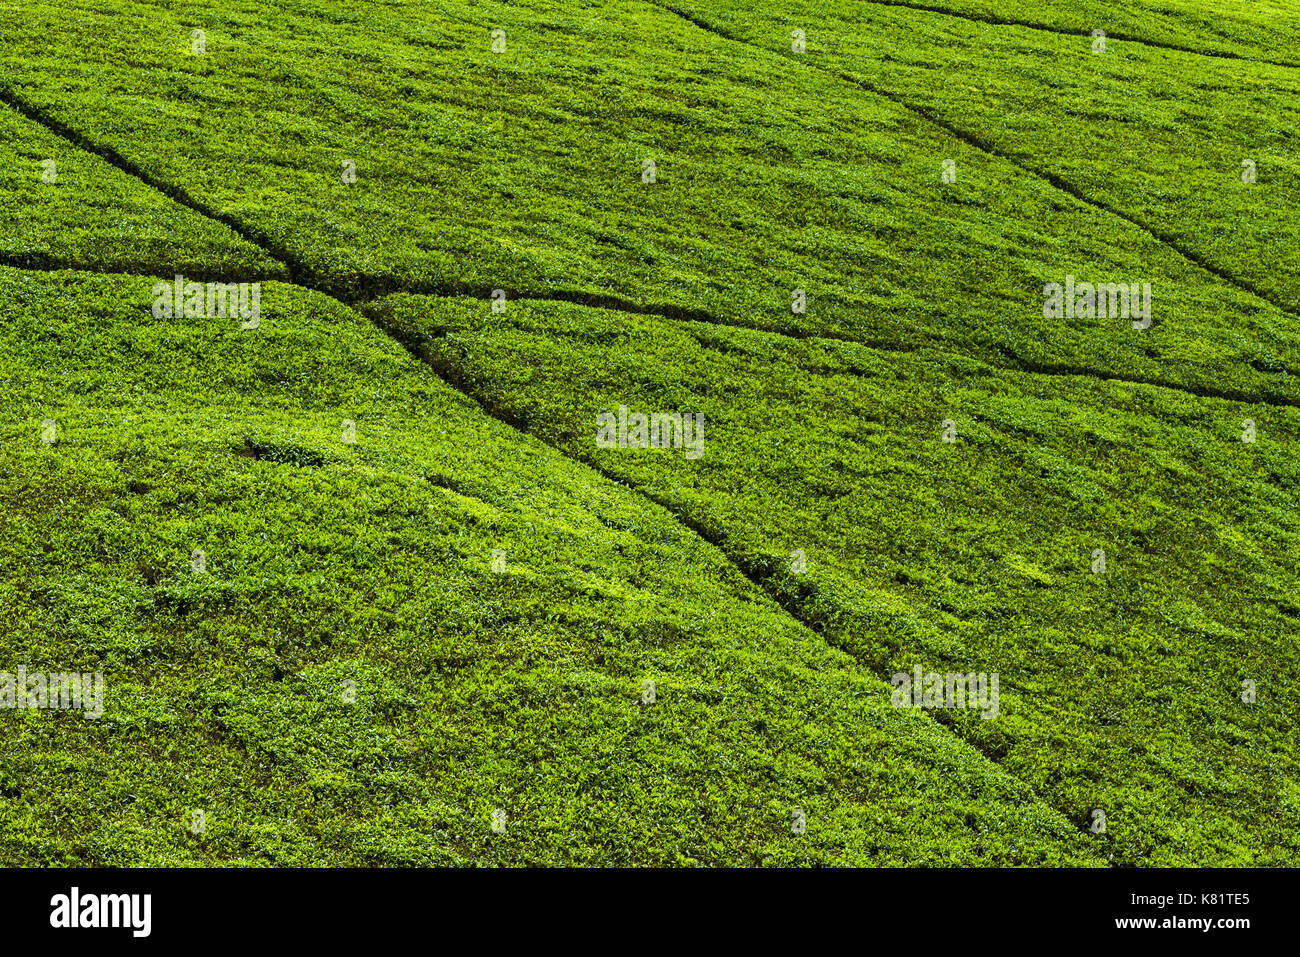 Abstract view of tea plantation tea plants growing on hill with paths cutting through them, Kenya Stock Photo